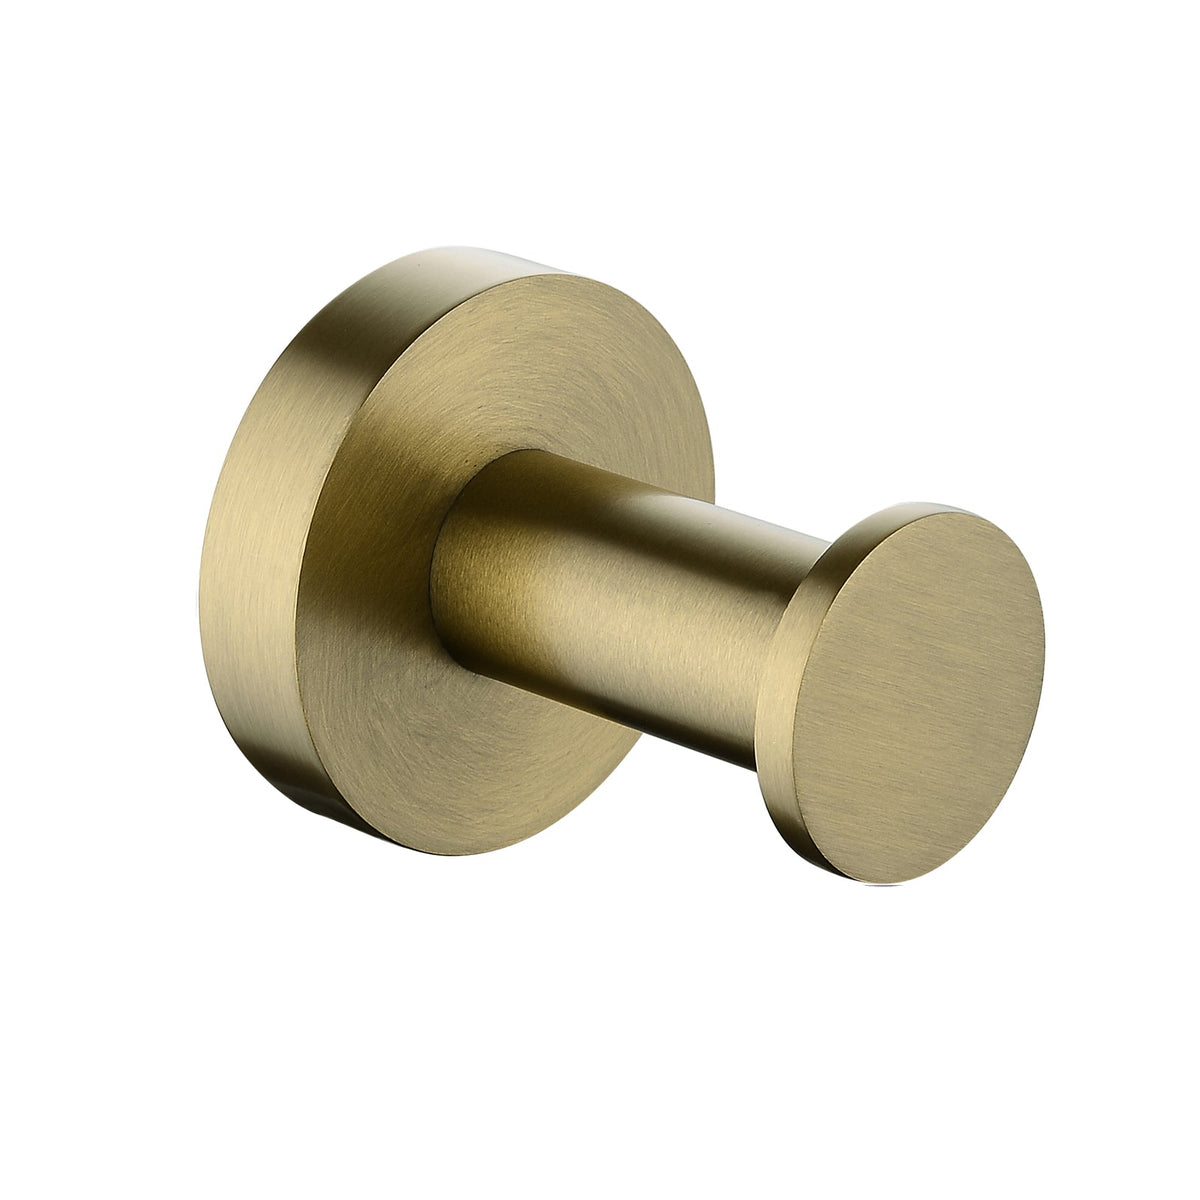 Norico Pentro Brushed Yellow Gold Round Bathroom Package III